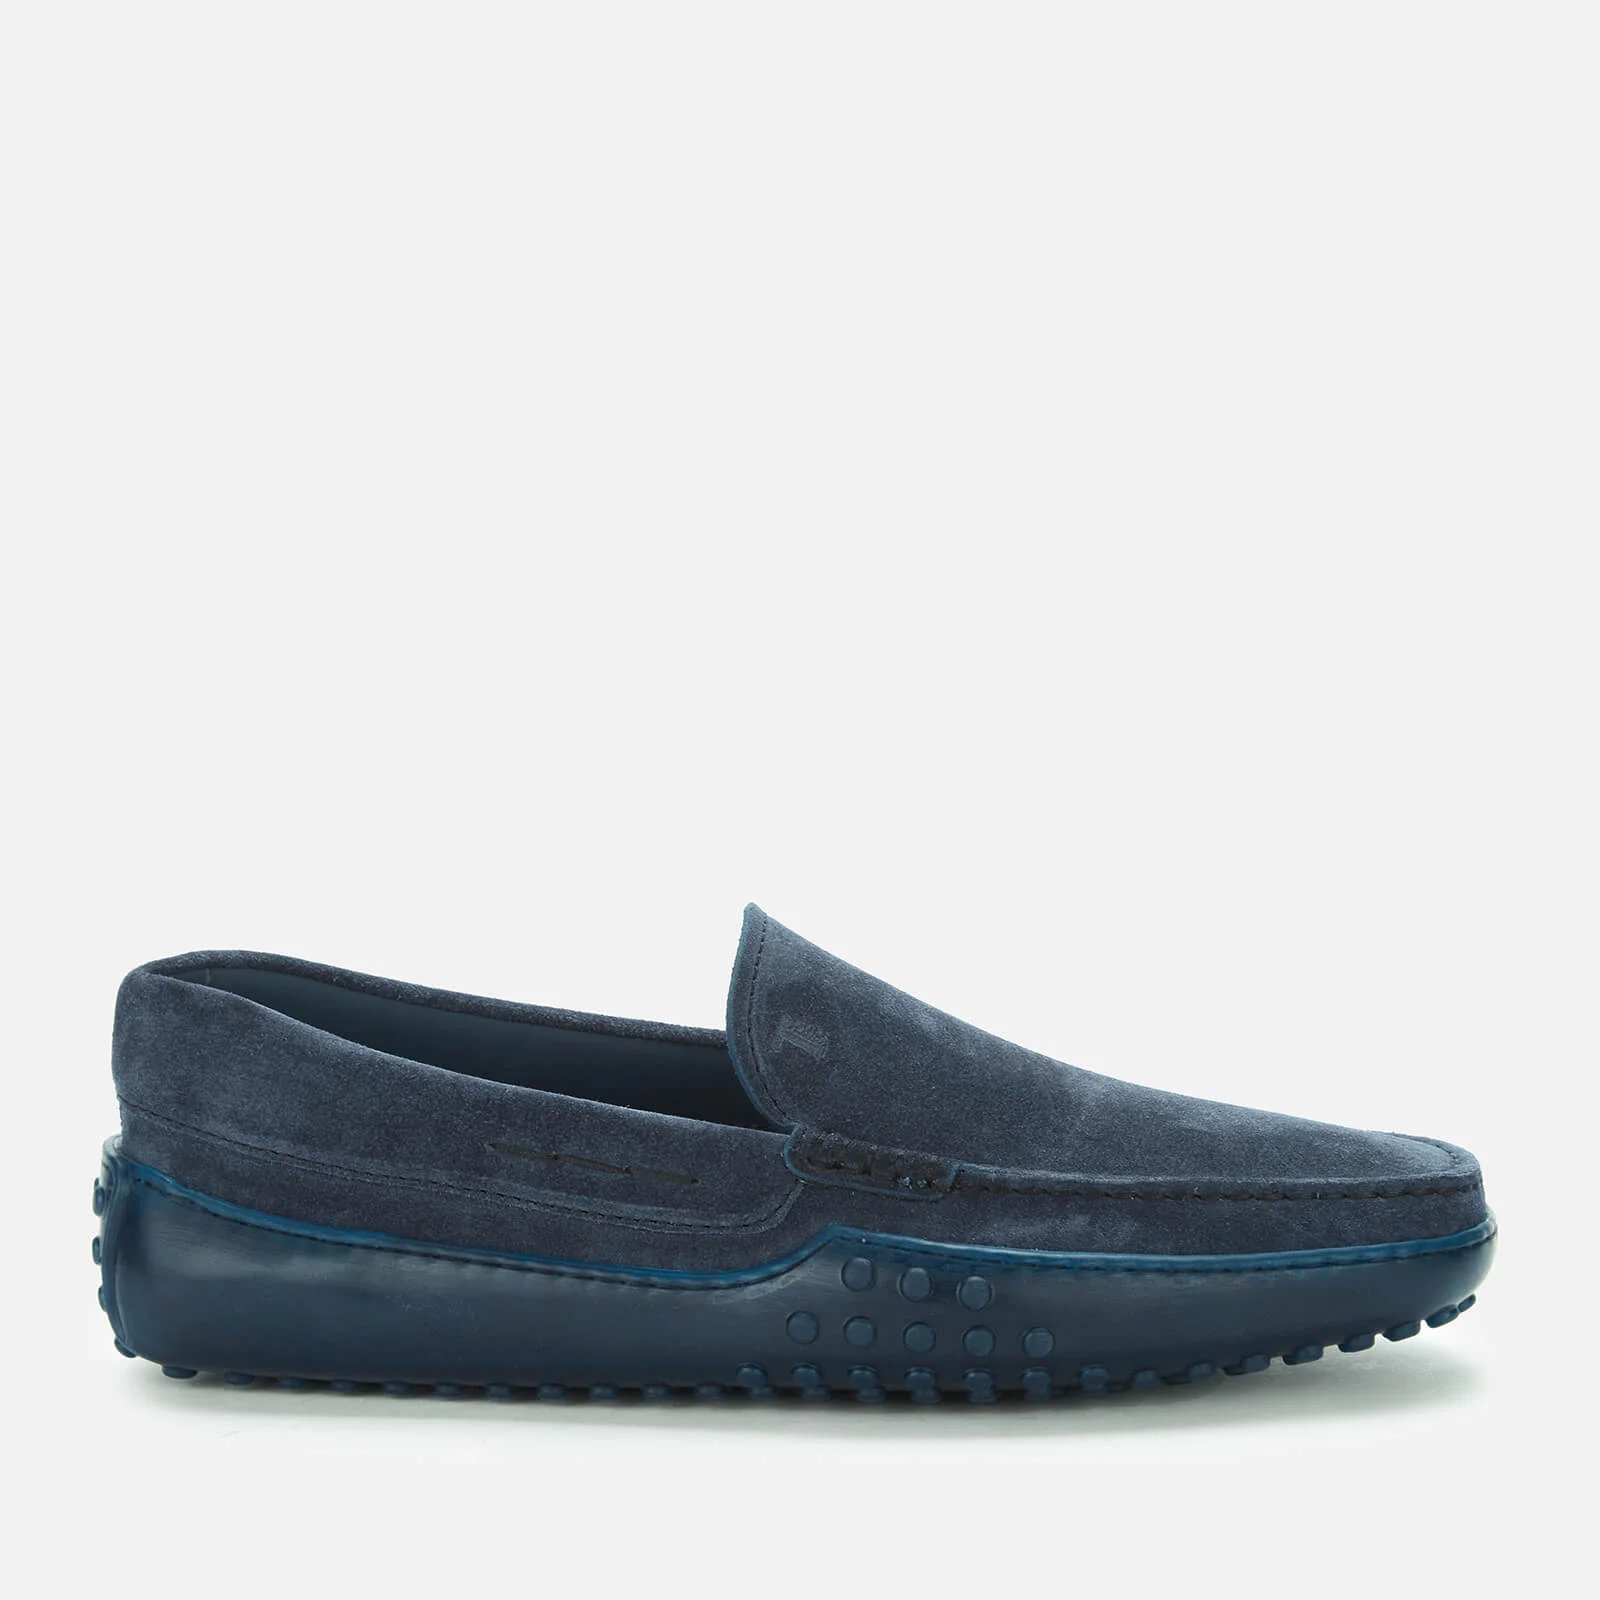 Tod's Men's Suede Slip-On Loafers - Blue Image 1